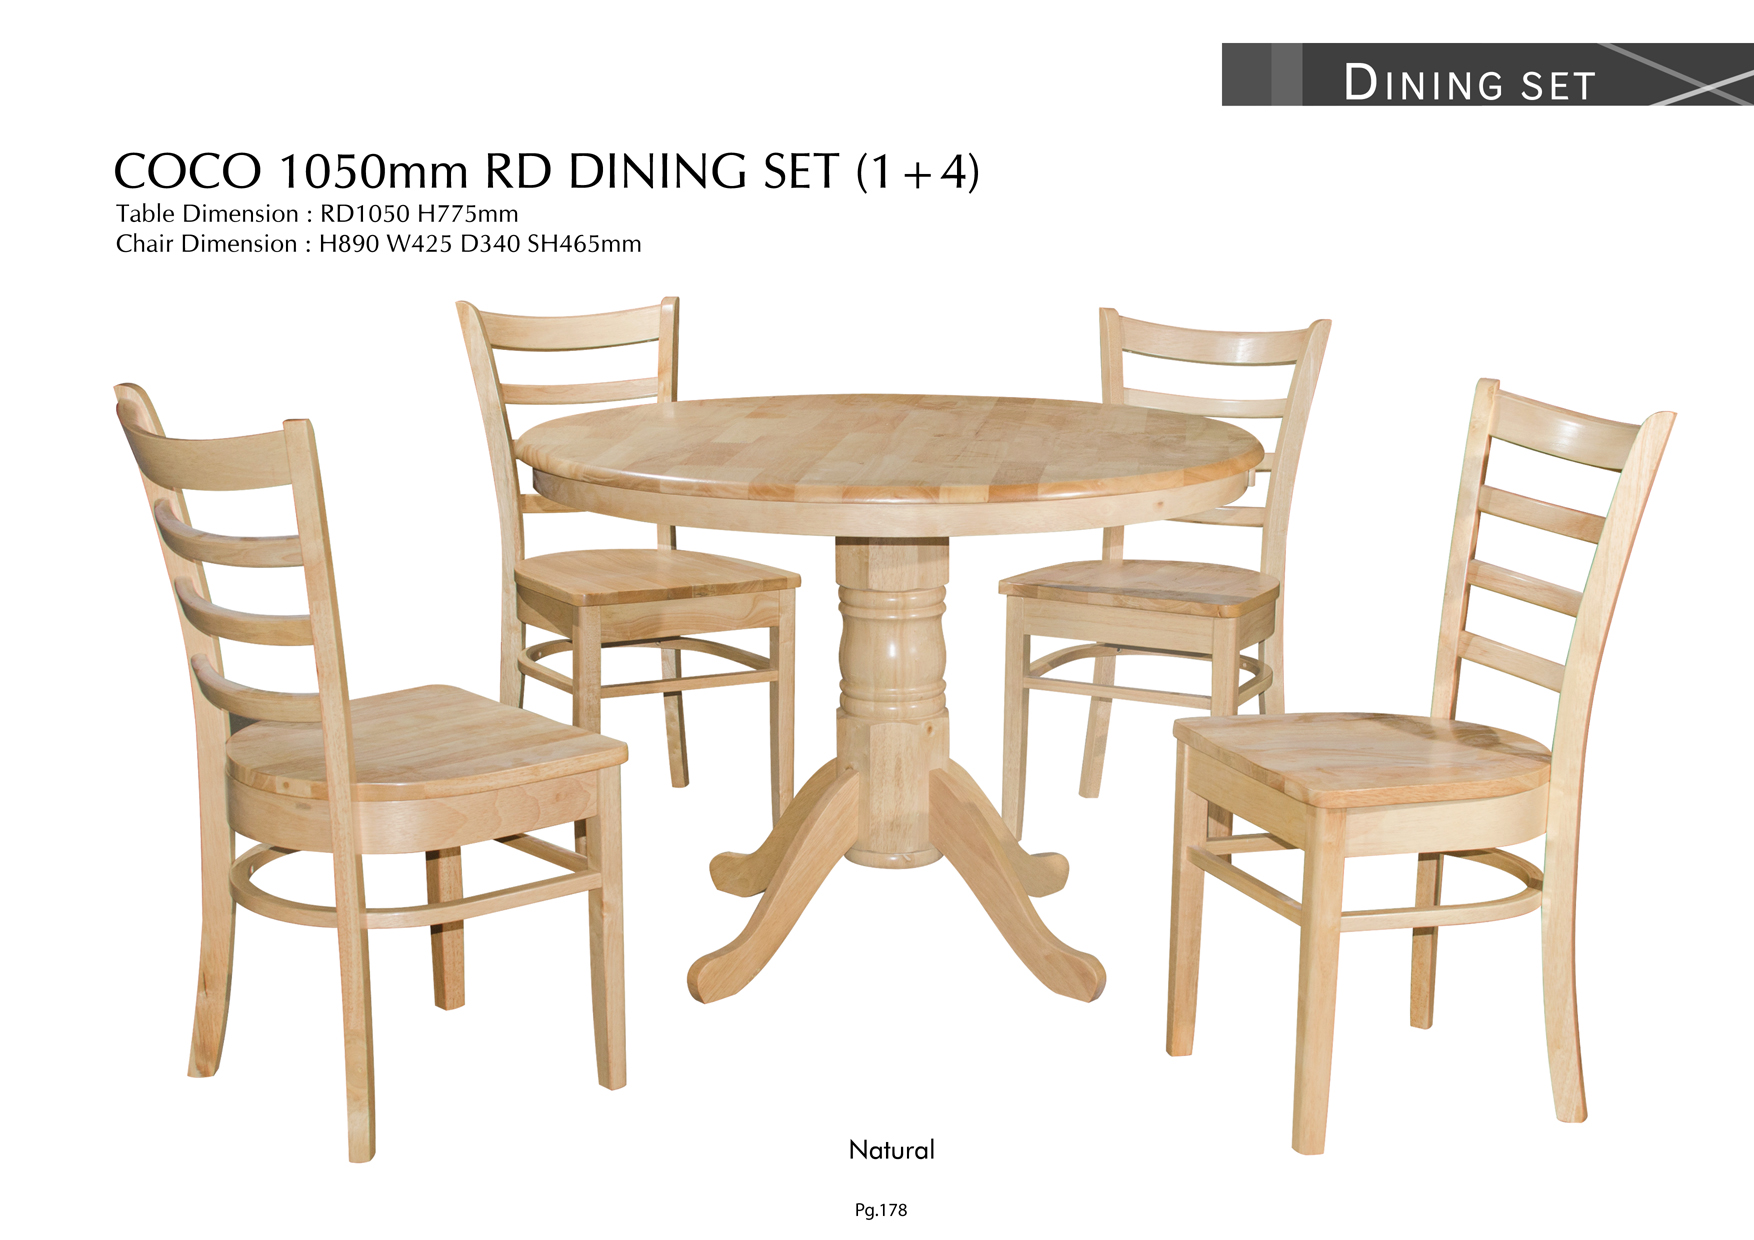 Product: PG178. COCO DINING SET